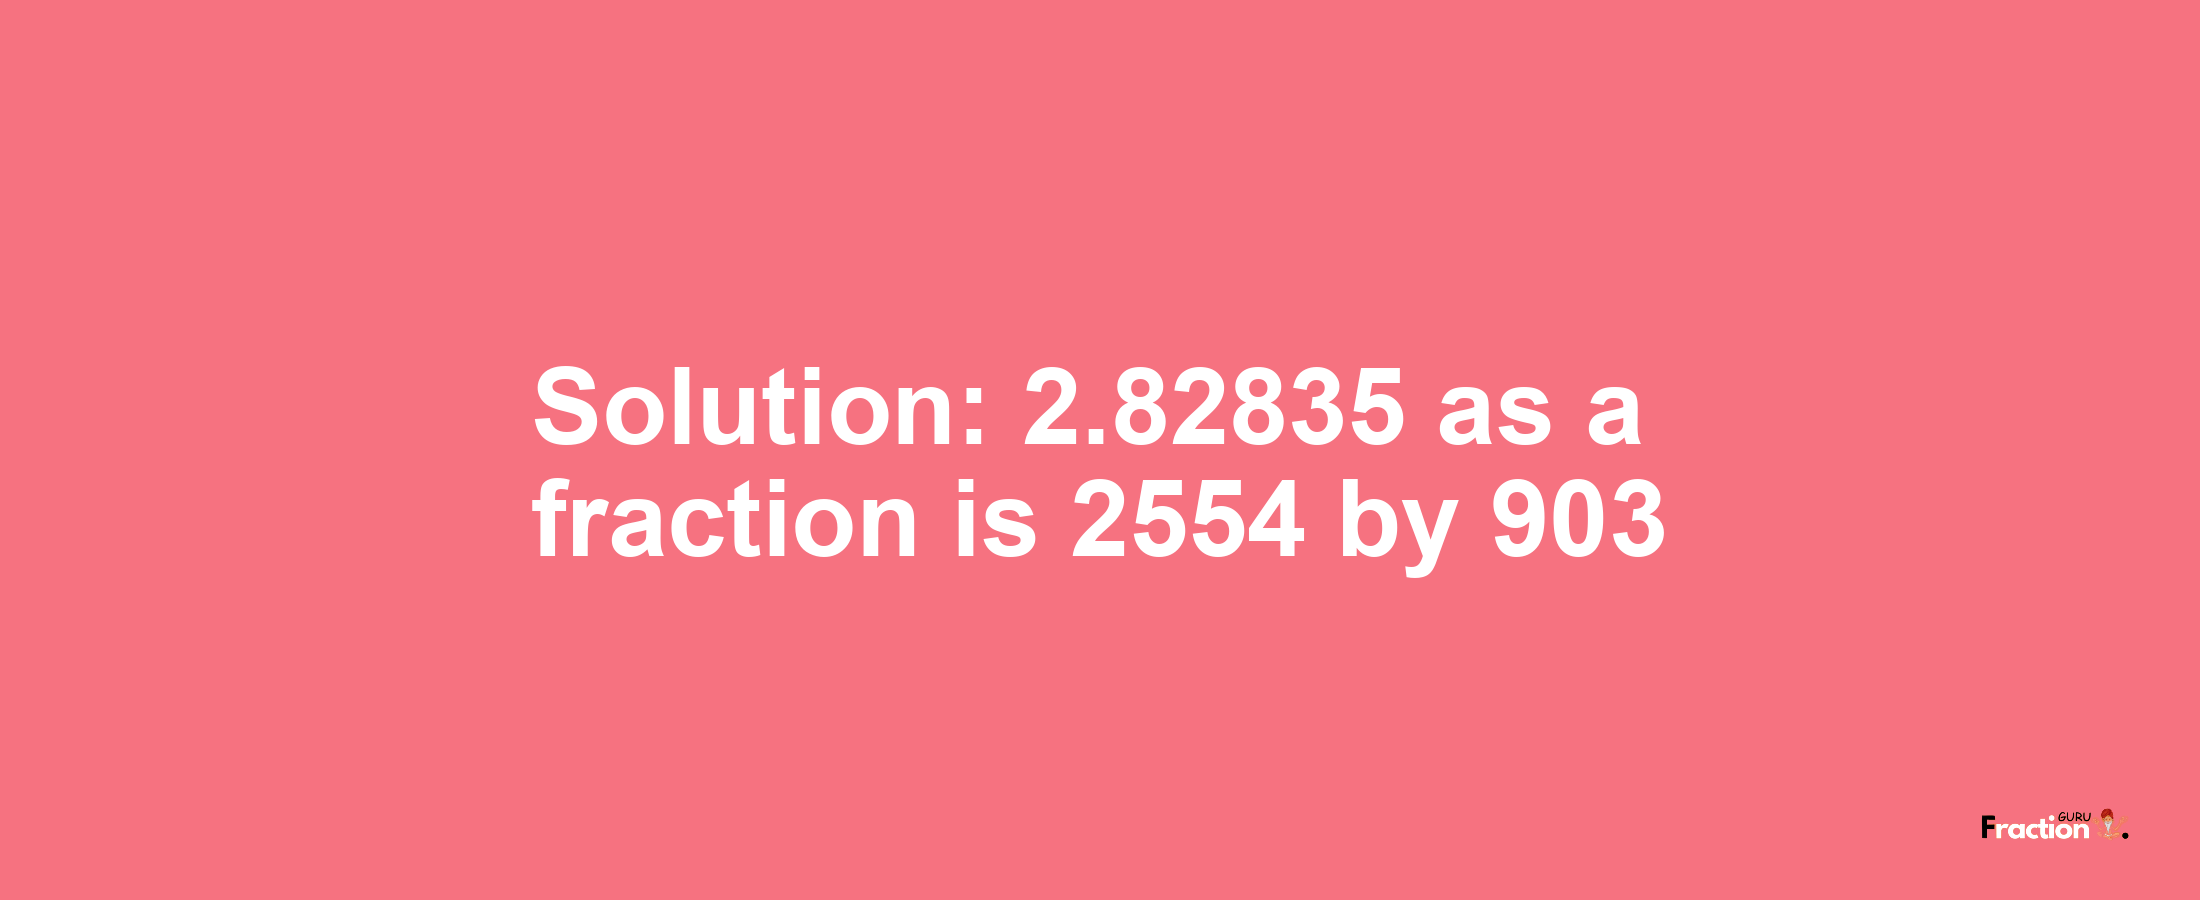 Solution:2.82835 as a fraction is 2554/903